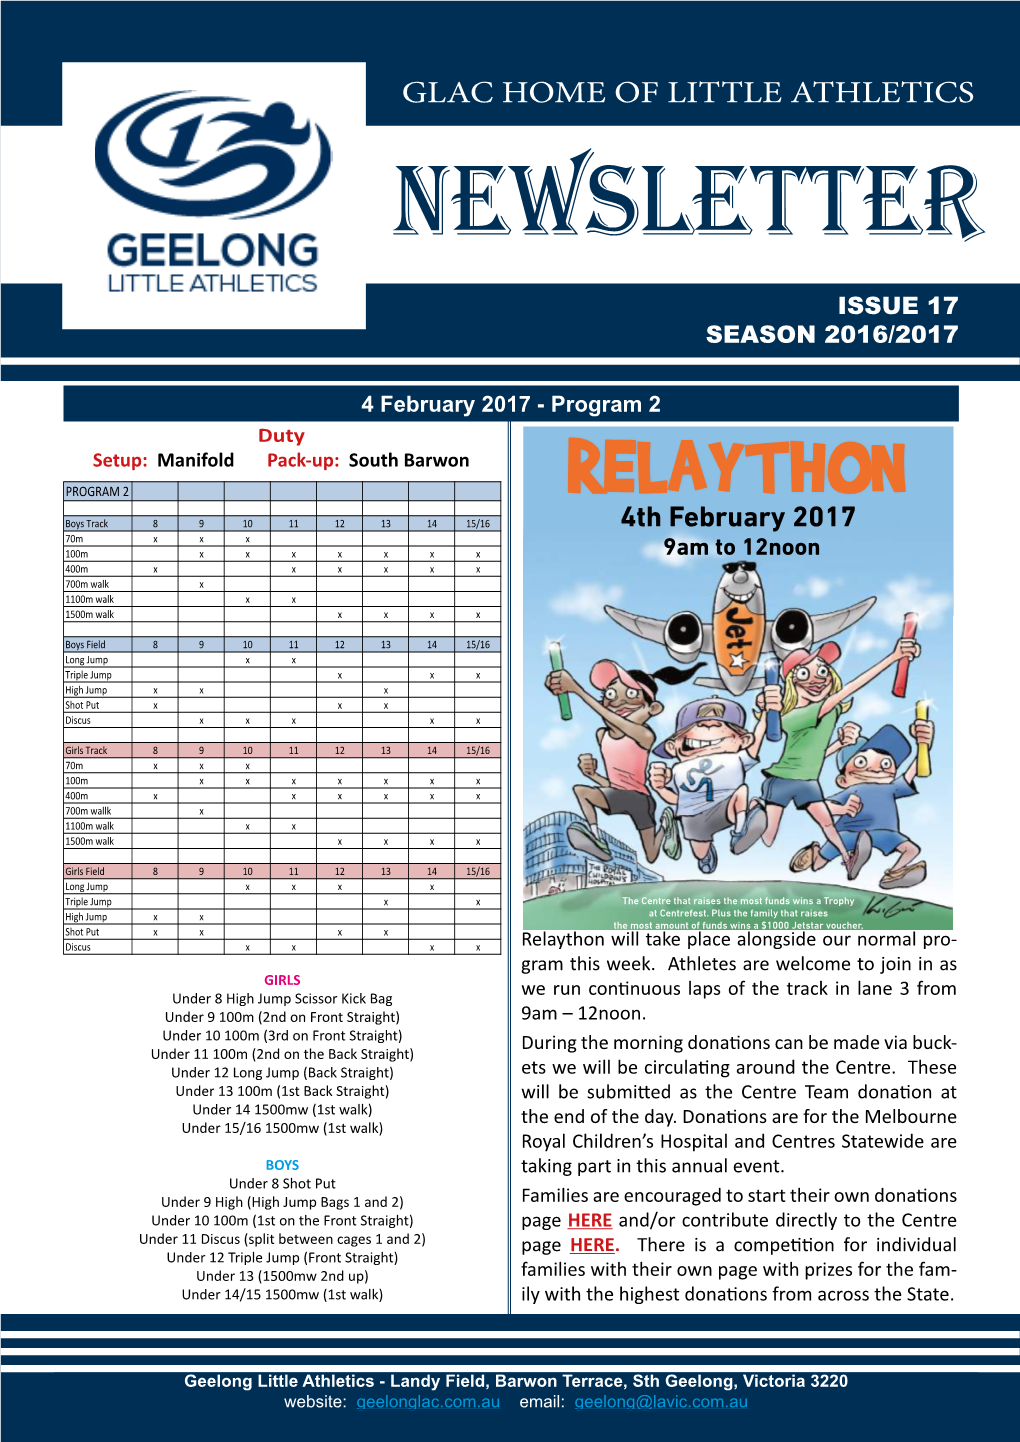 Glac Home of Little Athletics Newsletter